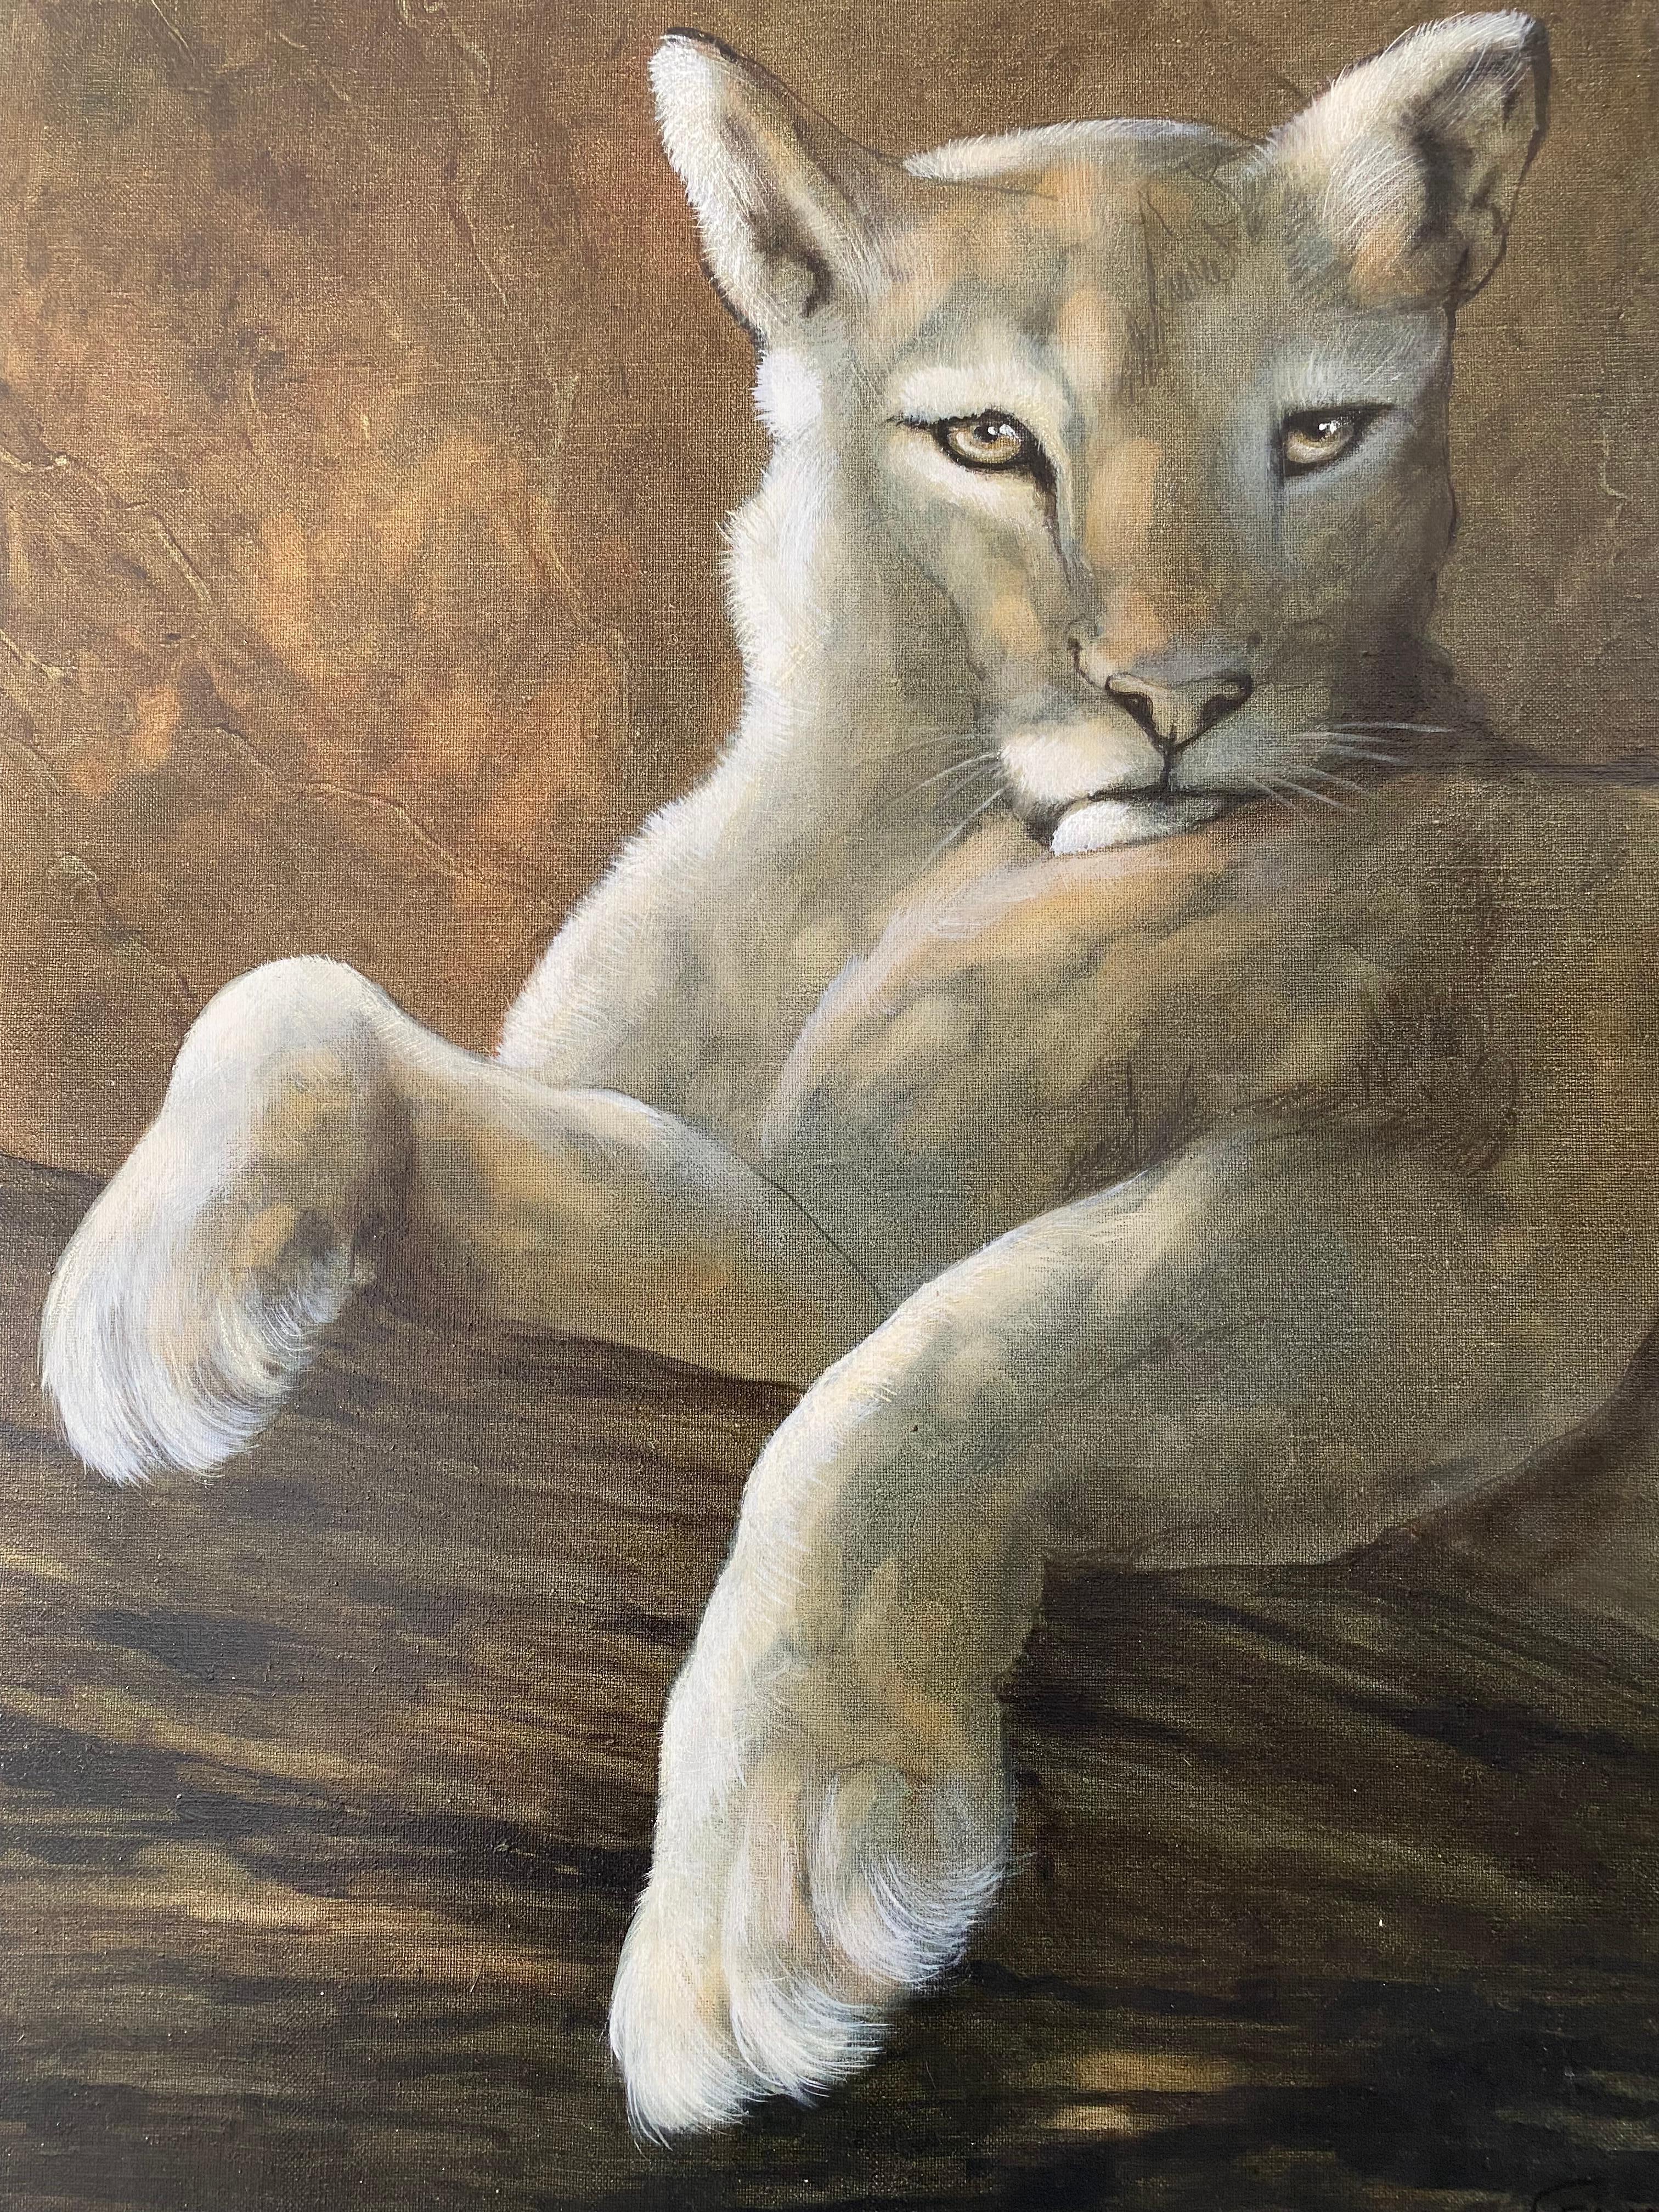 André Ferrand - The Puma 

Oil on canvas
2010
Size 50 x 65 cm
850€
